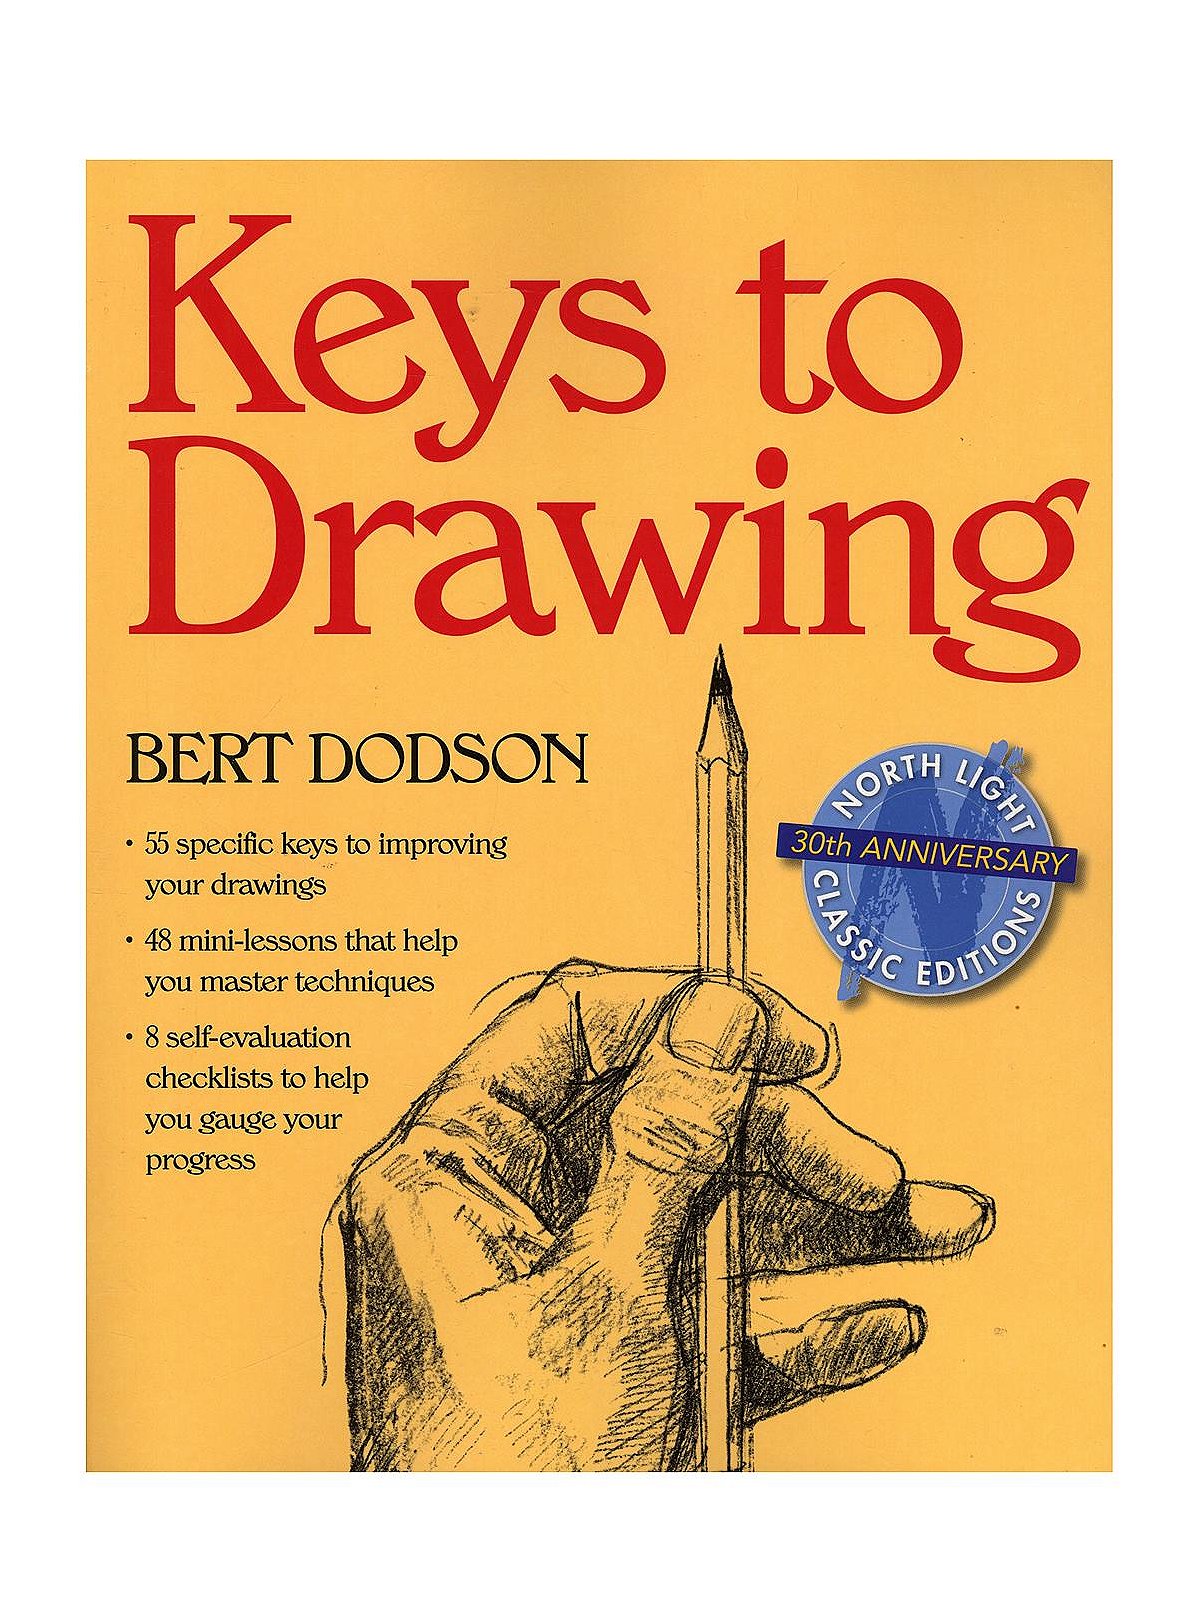 Keys to Drawing by Bert Dodson 1986, Hardcover GOOD